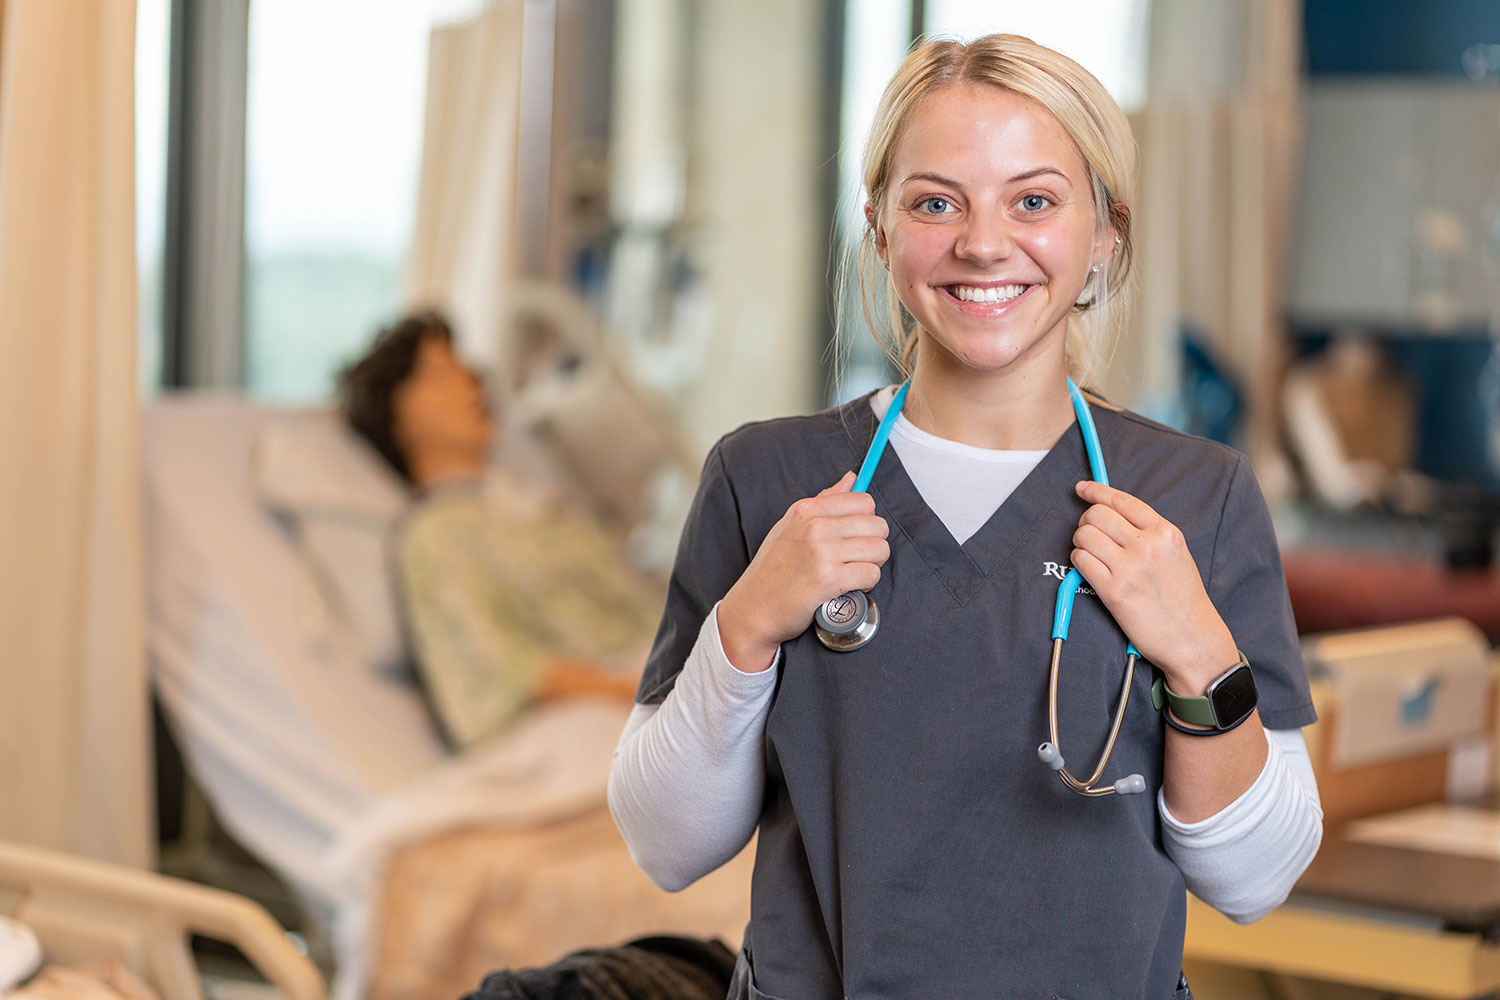 student in scrumbs standing in front of a school hospital bed